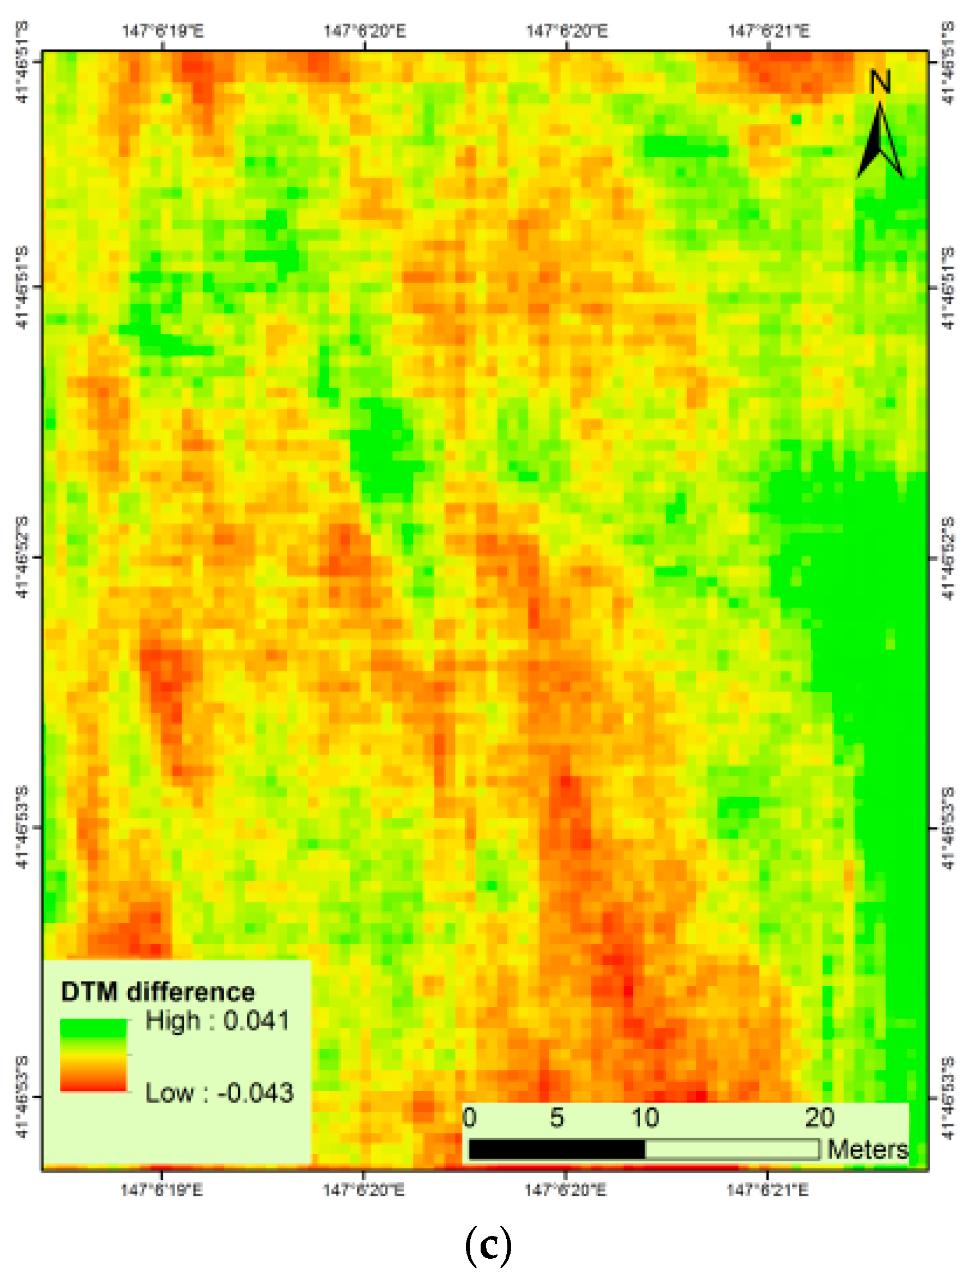 Poppy Crop Height and Capsule Volume Estimation from a Single UAS Flight